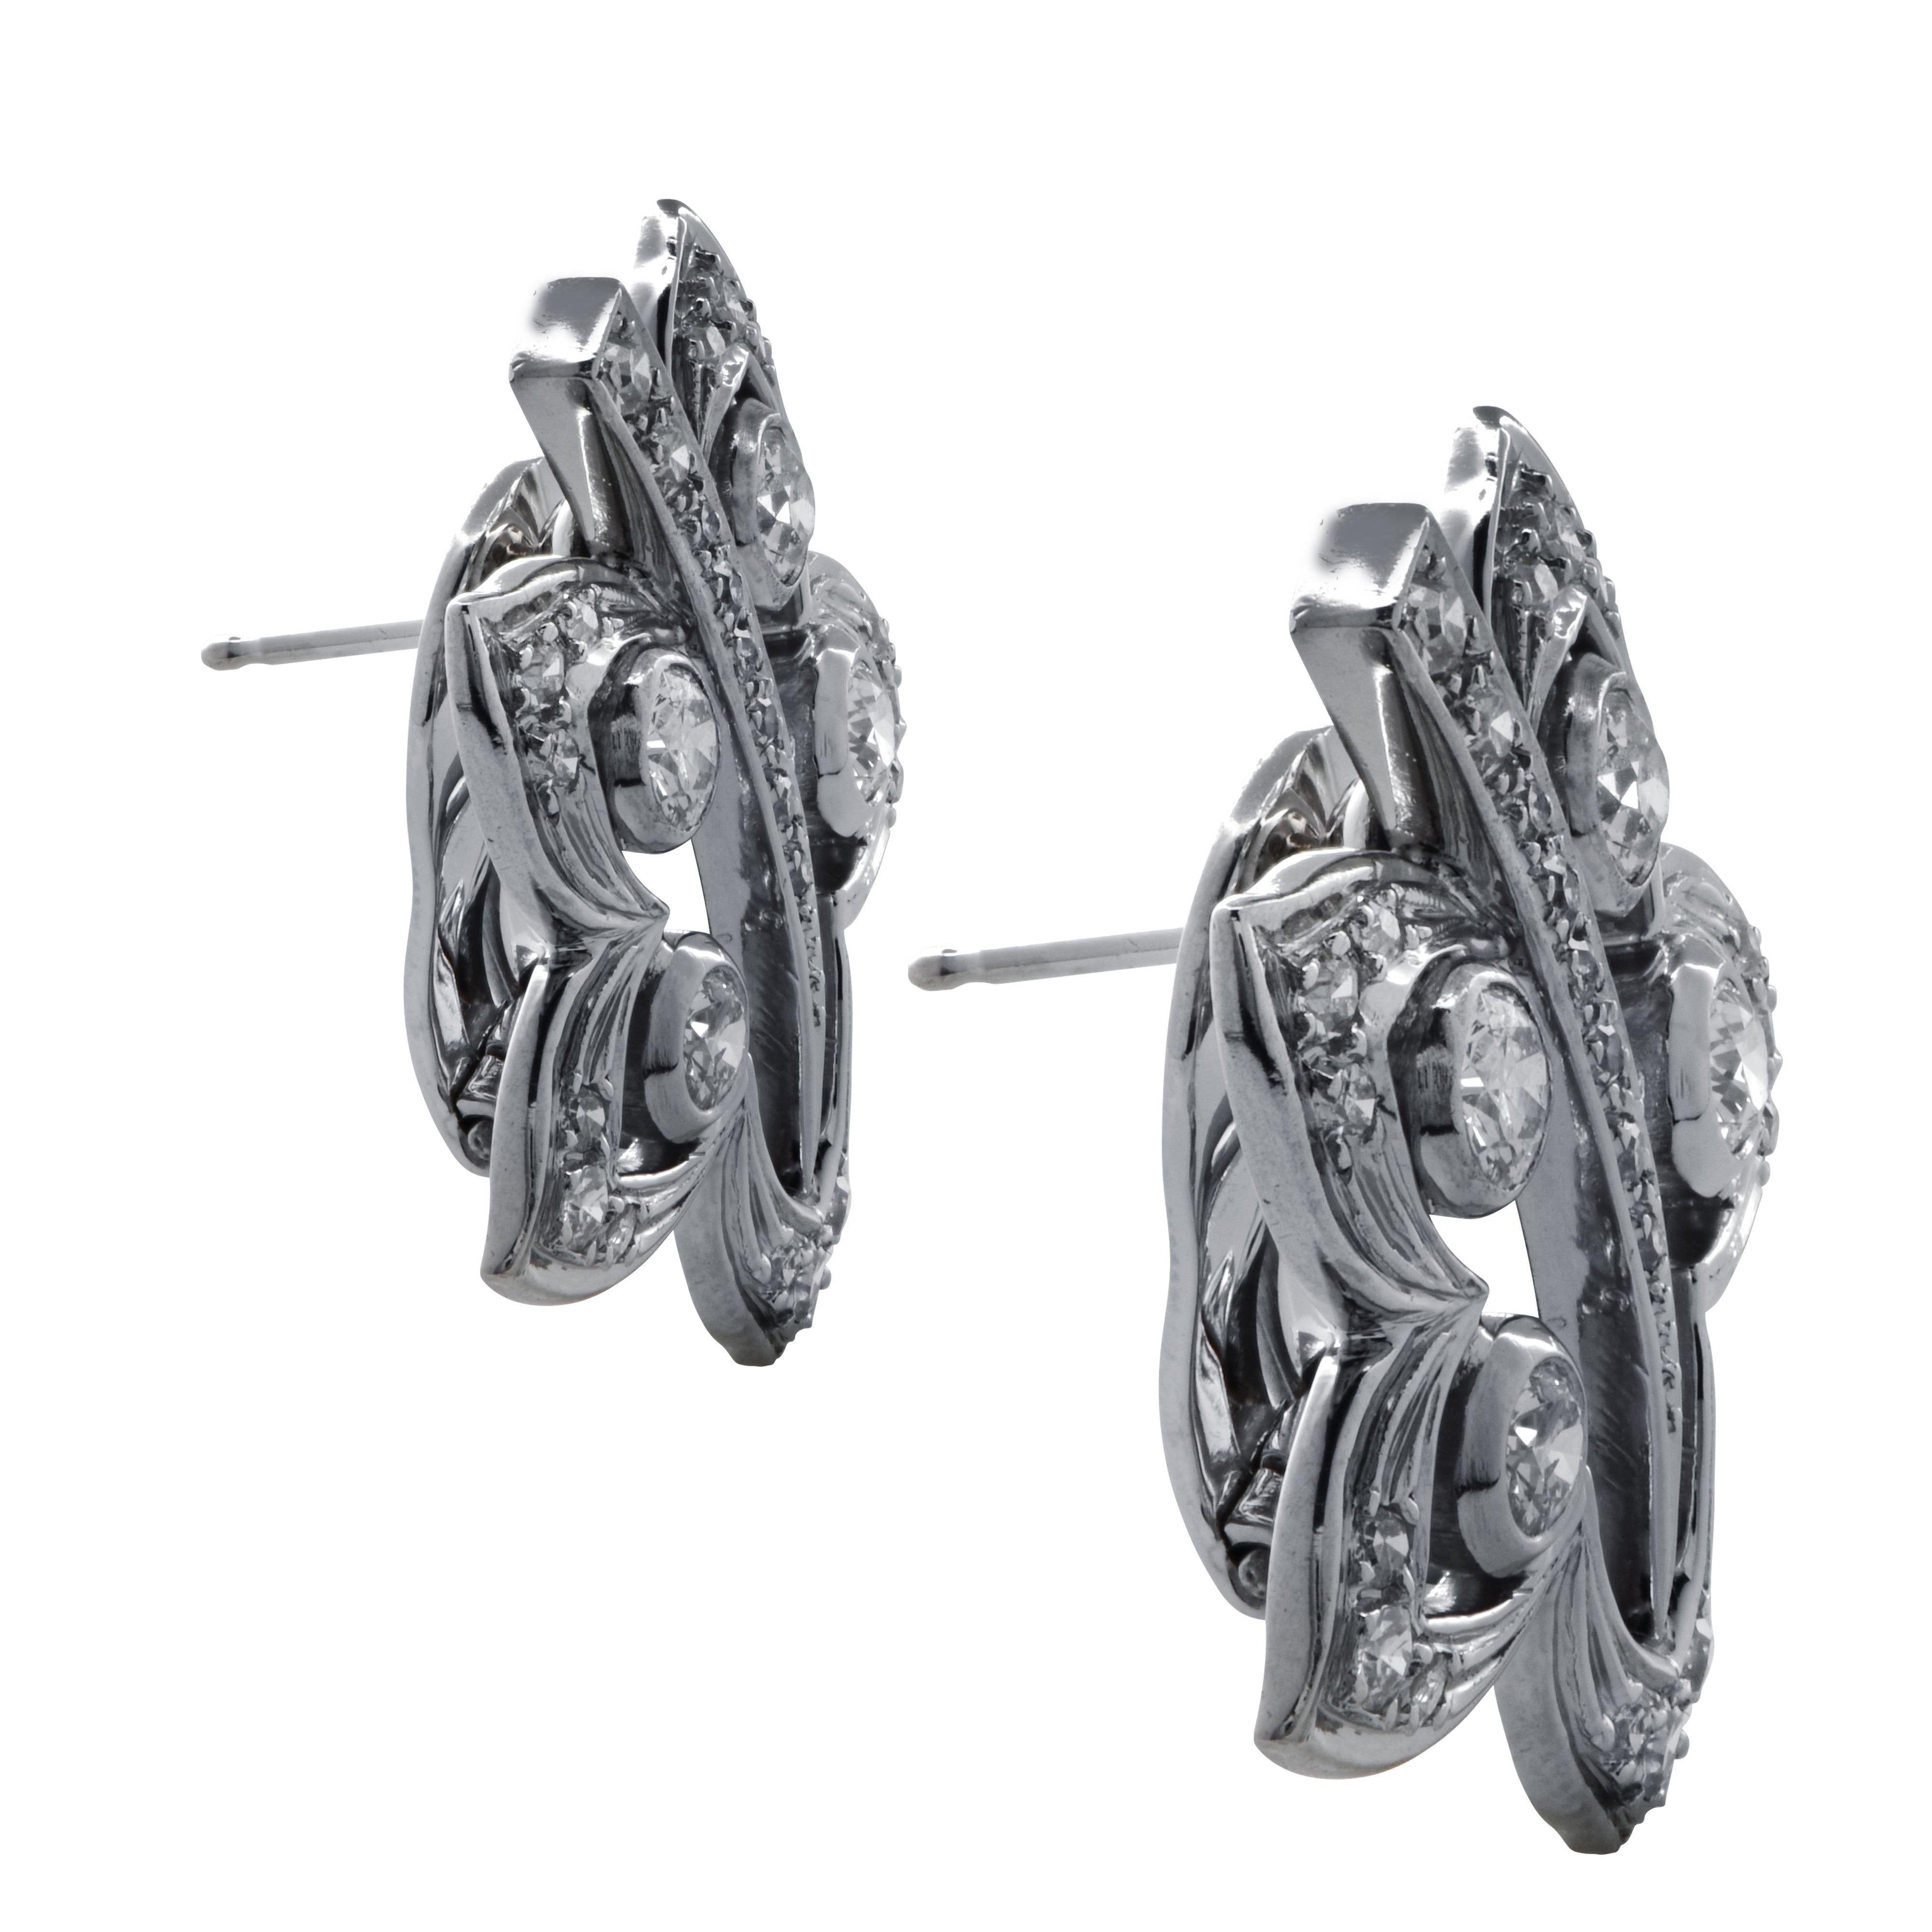 Beautiful earrings crafted in 18 karat white gold featuring 54 round brilliant and single cut diamonds weighing approximately 2.3 carats total, G color, VS-SI clarity, set in delightful flowers. These stunning earrings have posts and safety levers.